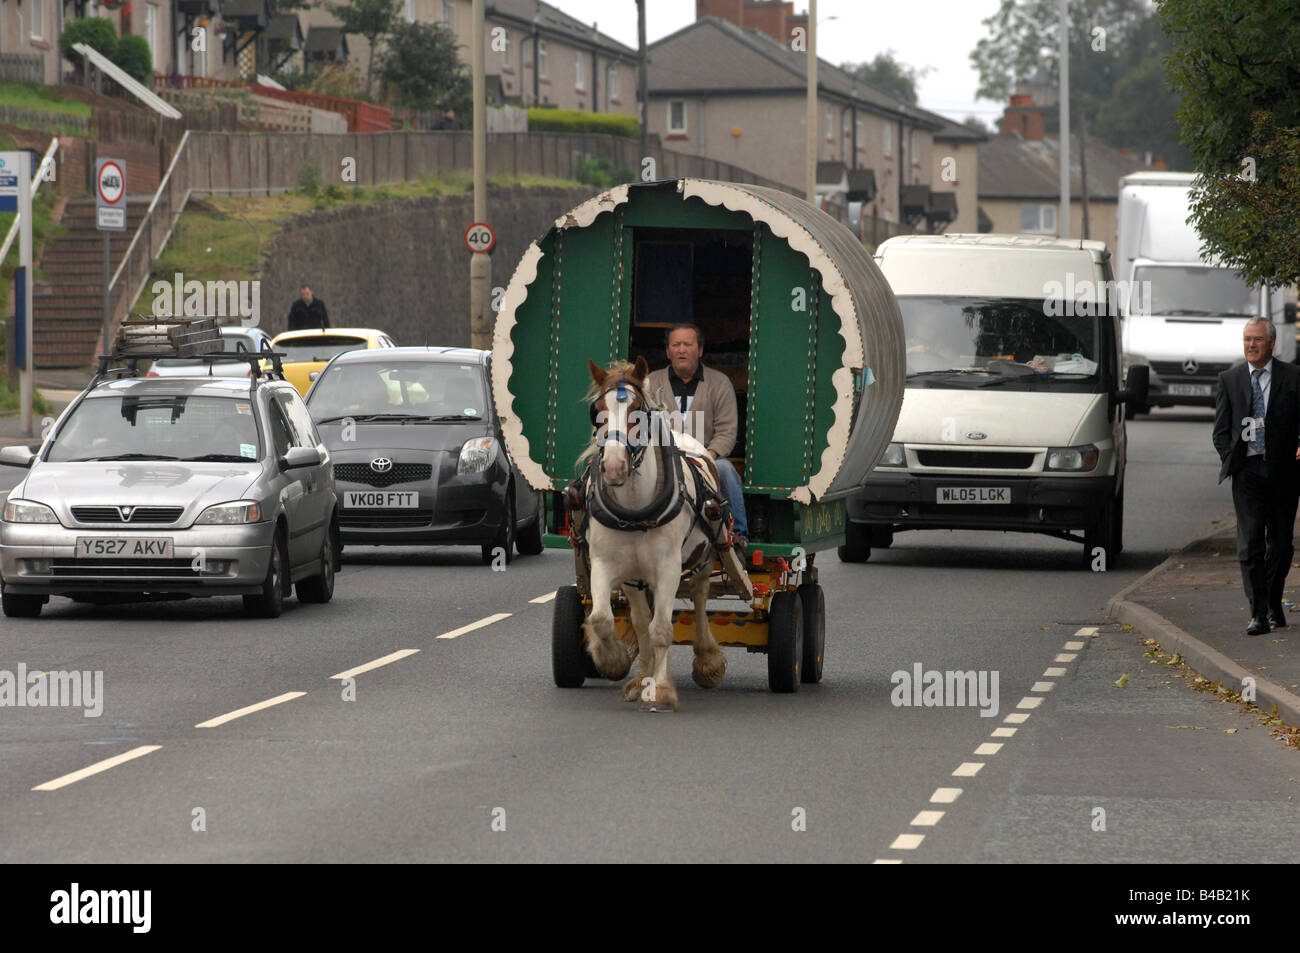 Horse drawn caravan travelling through Dudley in the West Midlands England Stock Photo